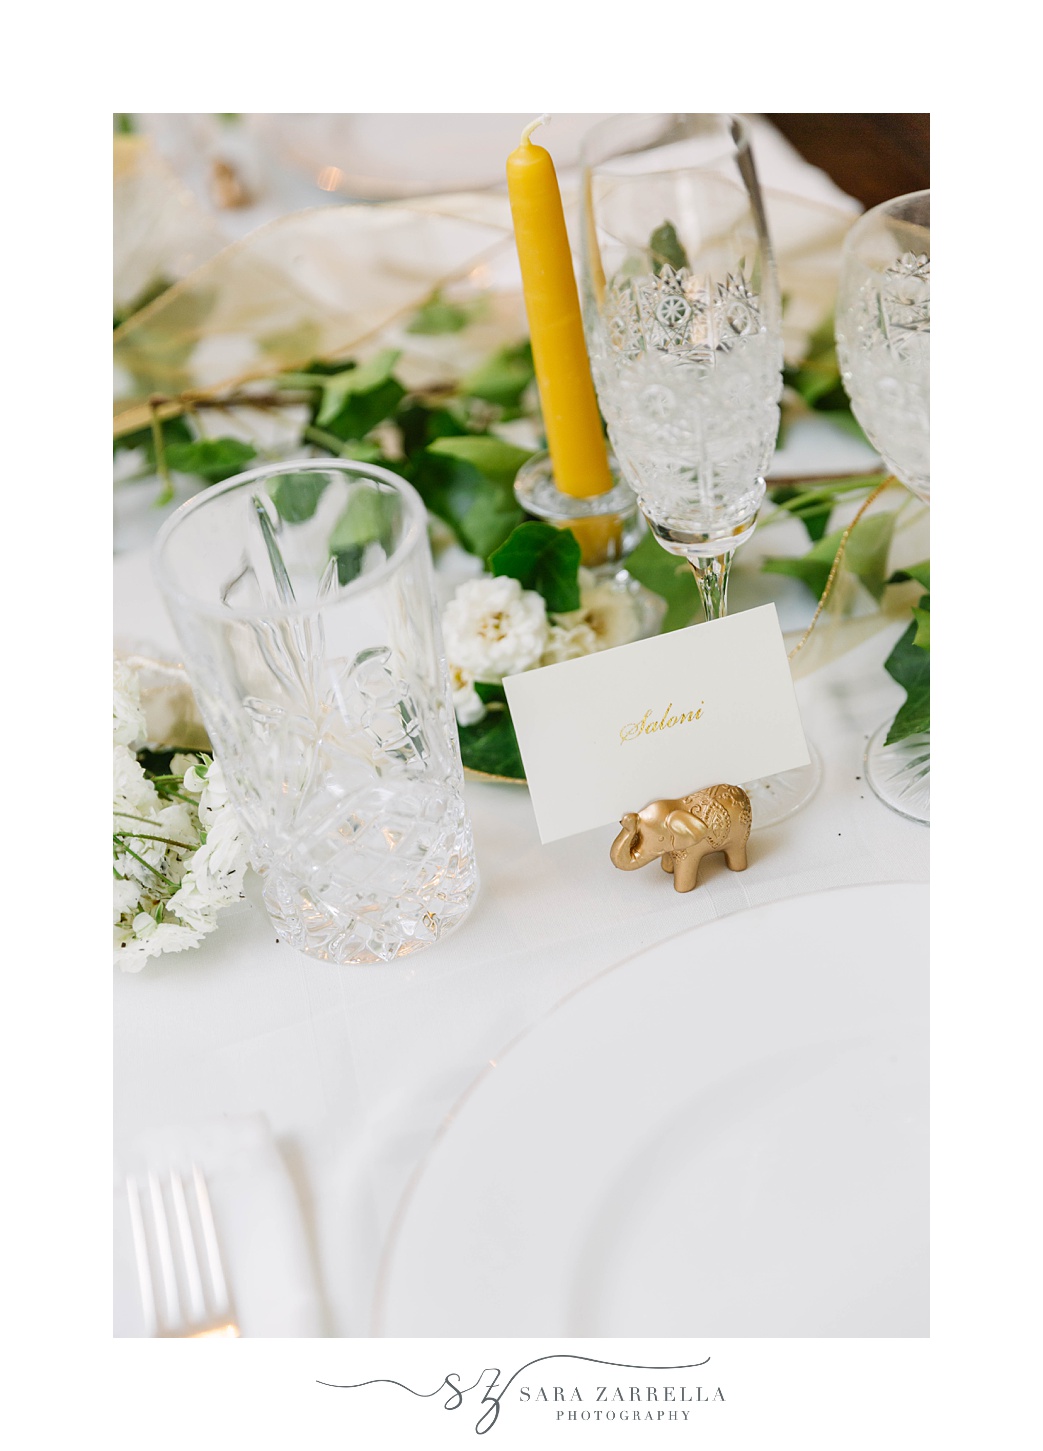 place settings with elephant card holders for Hindu wedding ceremony at home